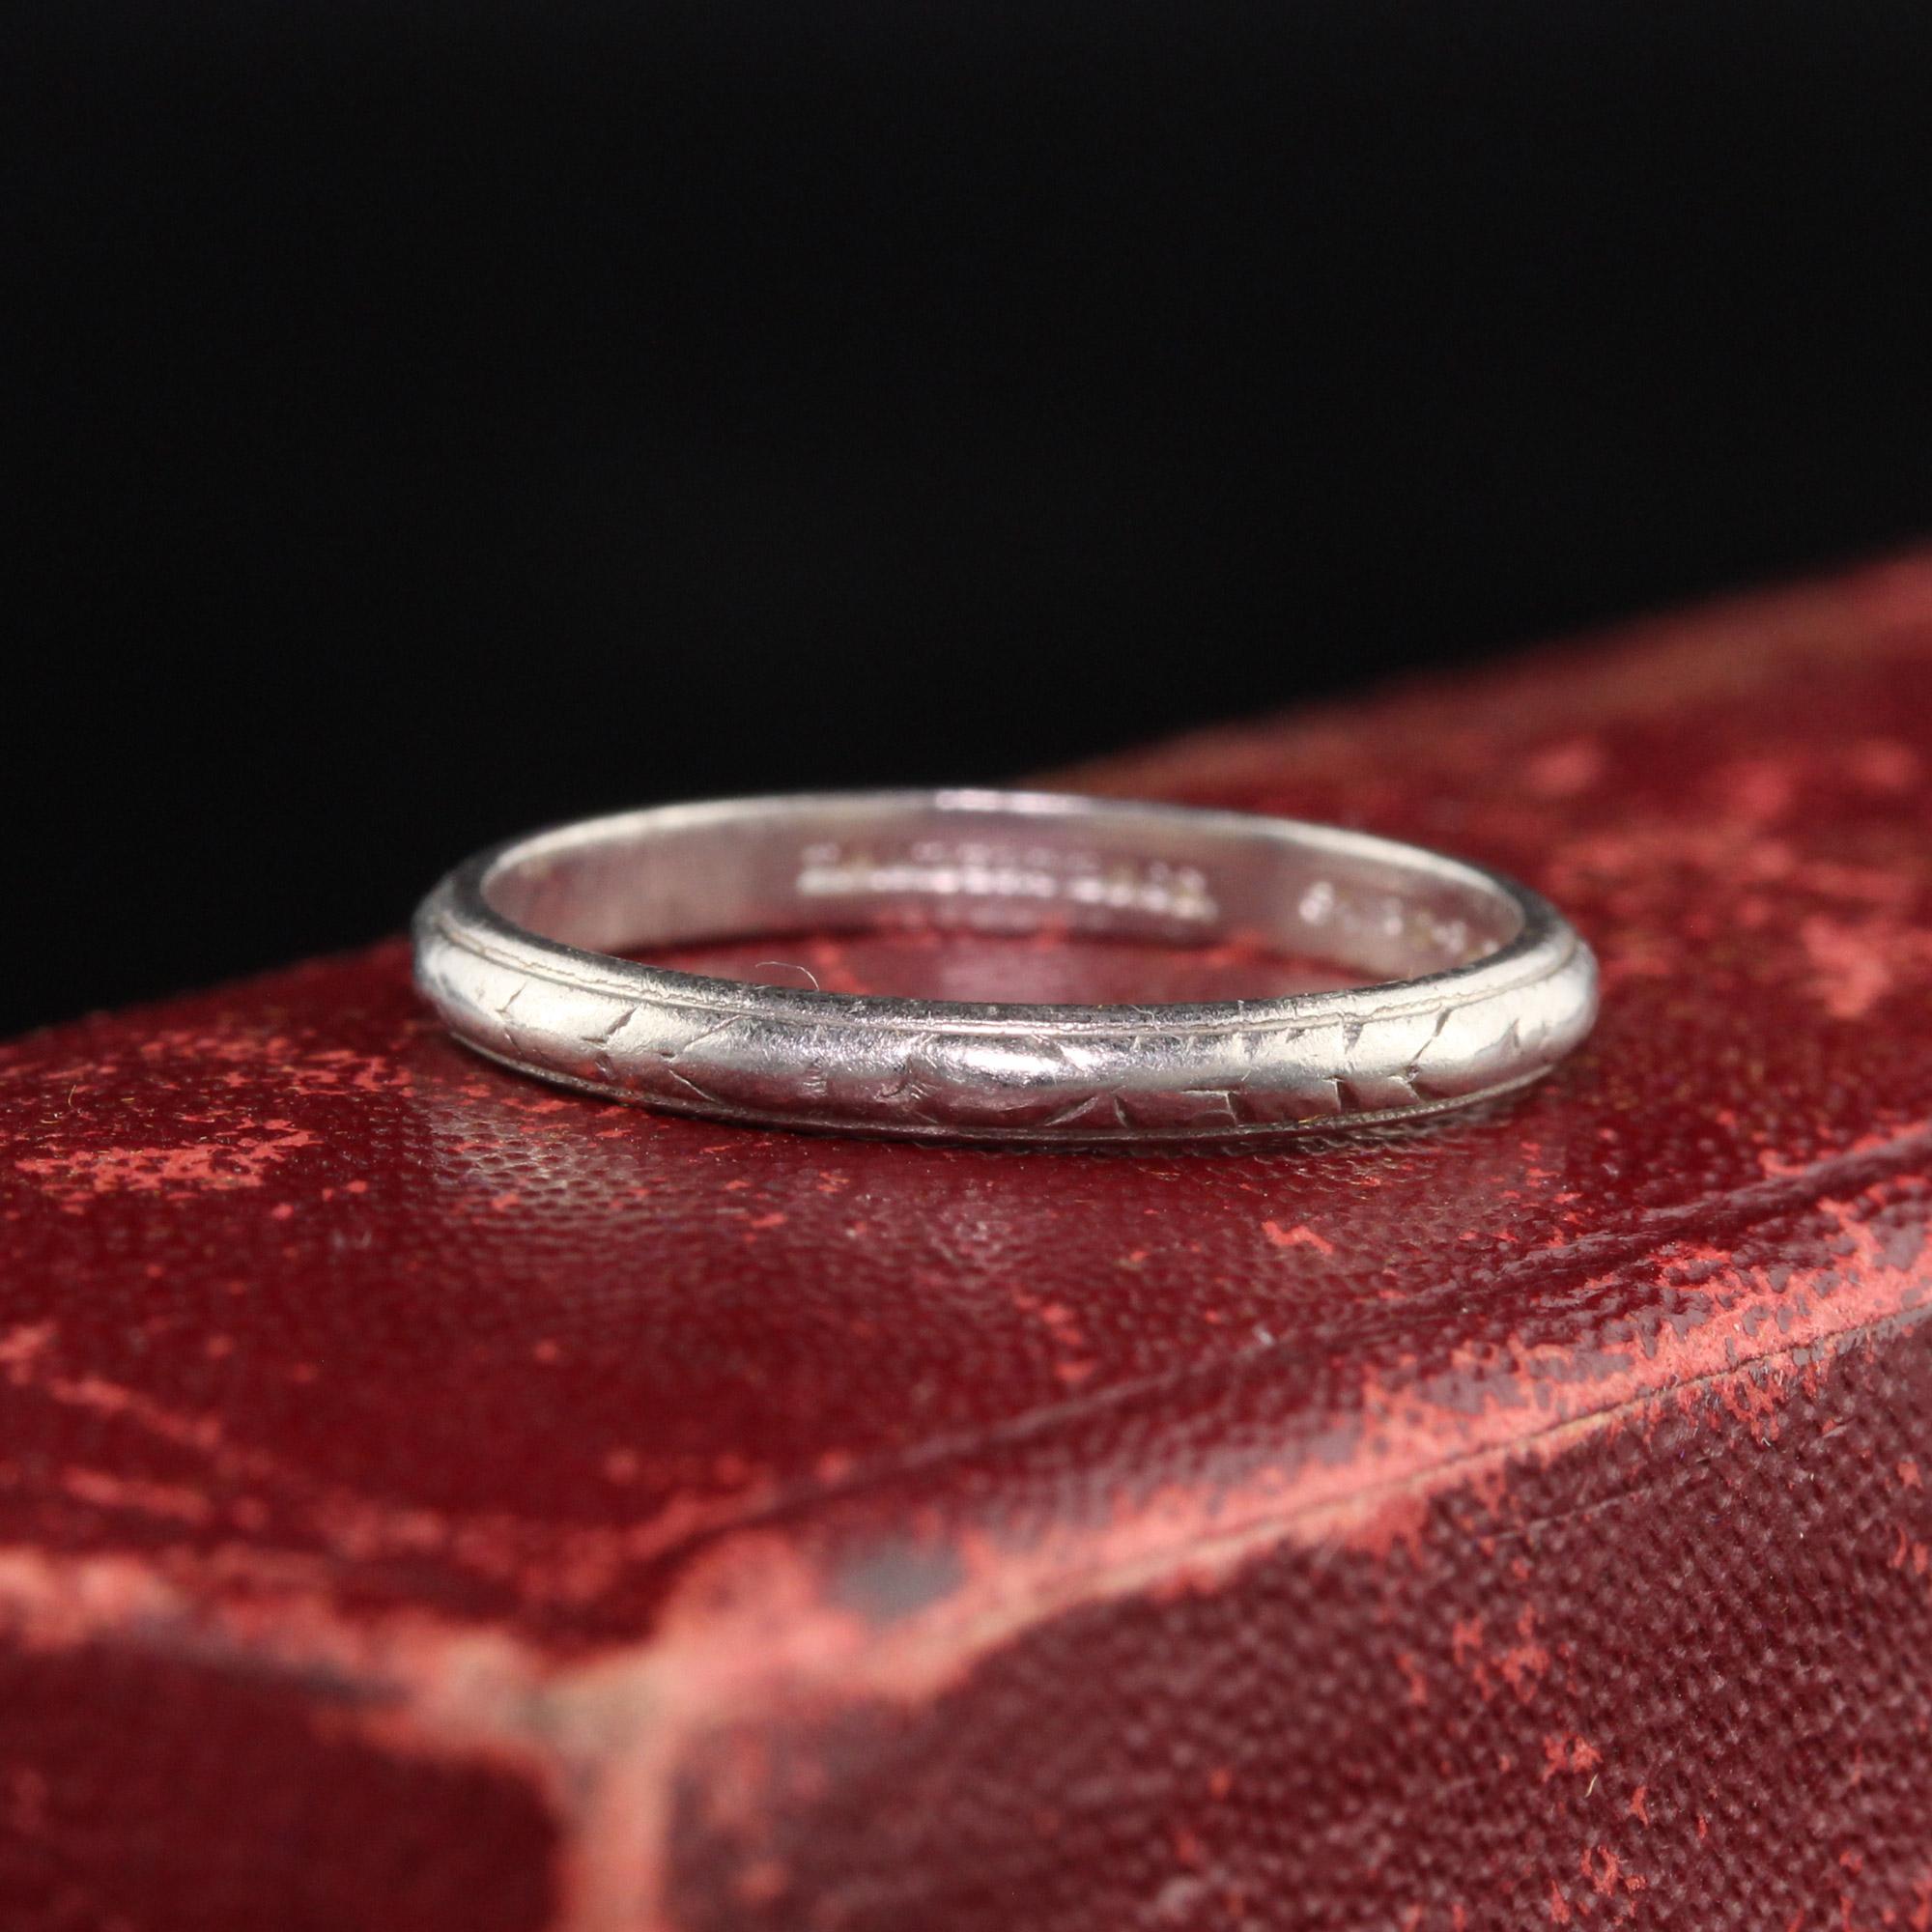 Beautiful Antique Art Deco Lambert Bros Platinum Engraved Wedding Band - Size 5. This classic wedding band is signed by Lambert Bros which is a well known jewelry house in which was created in the late 1800s.

Item #R0972

Metal: Platinum

Weight: